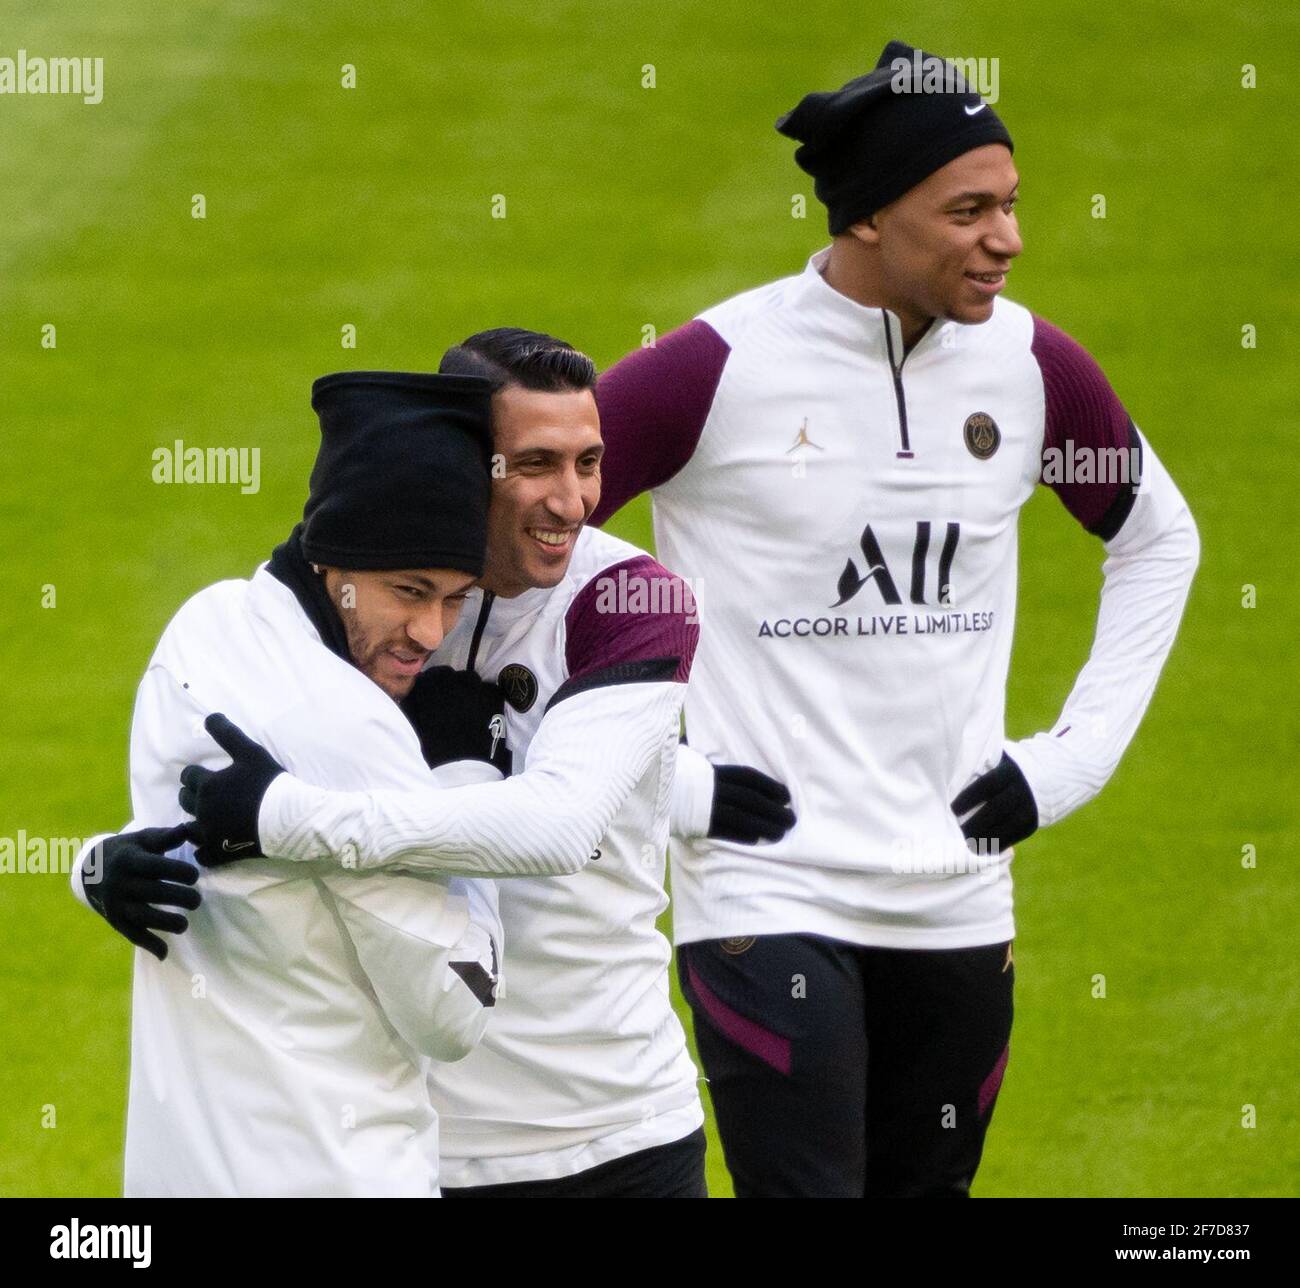 Munich, Germany. 06th Apr, 2021. Football: Champions League, before the quarter-final Bayern Munich - Paris Saint-Germain. Final training Paris Saint-Germain at the Allianz Arena. Neymar Jr (l-r), Angel Di Maria and Kylian Mbappe in action. Credit: Sven Hoppe/dpa/Alamy Live News Stock Photo